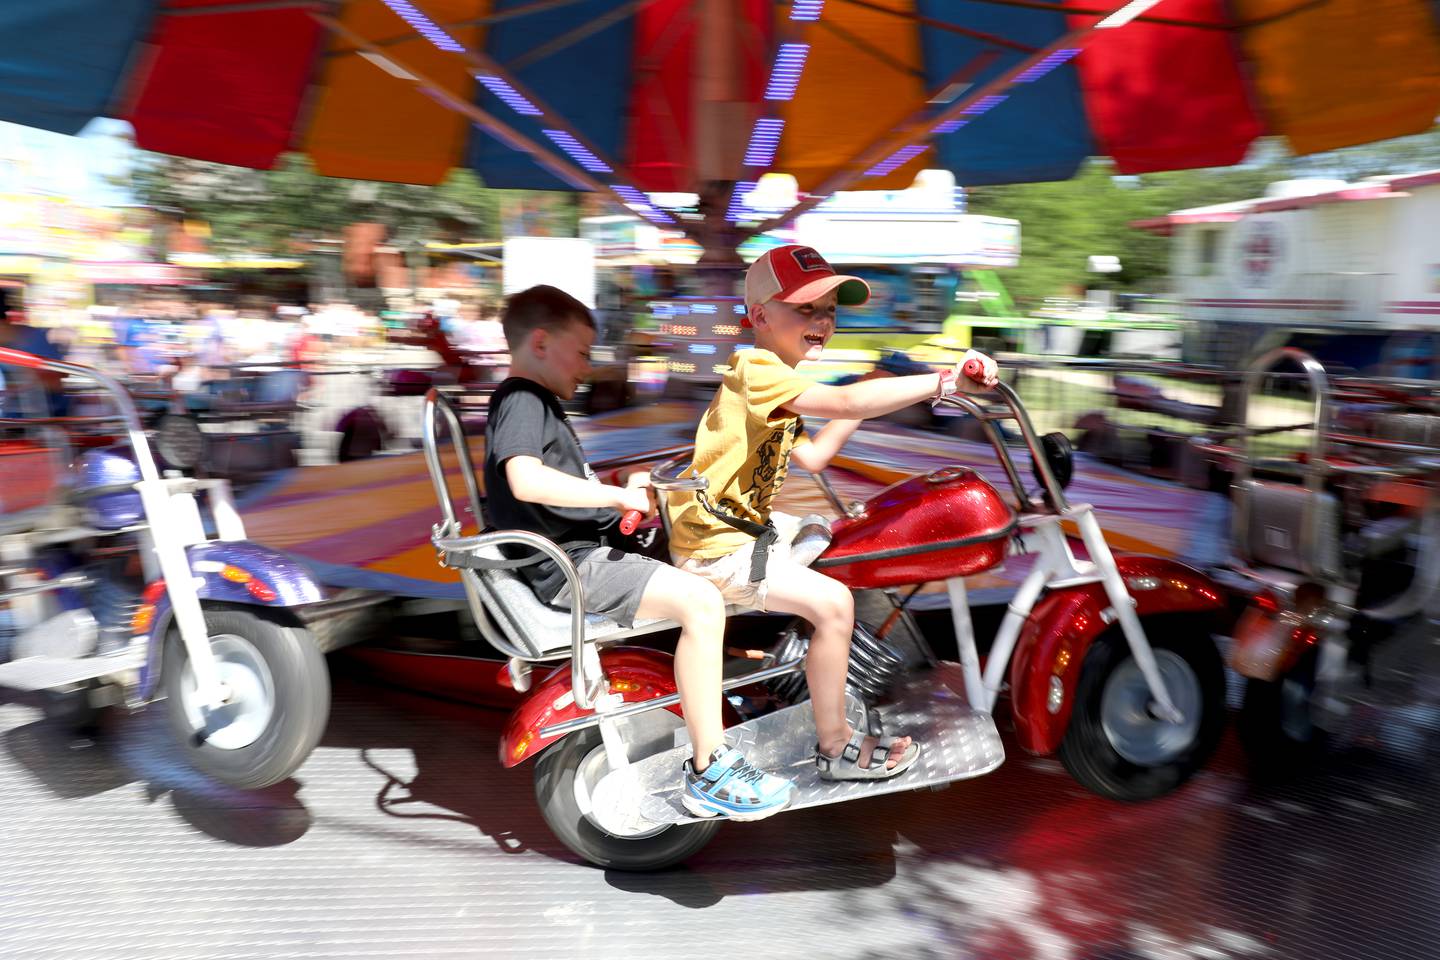 Pierce Cole, 5, (right) and Conrad Hylton, 5, both of Geneva, ride a motorcyle carnival ride during opening day of Swedish Days Festival in Geneva on Wednesday, June 22, 2022. The festival runs through Sunday, June 26, 2022.